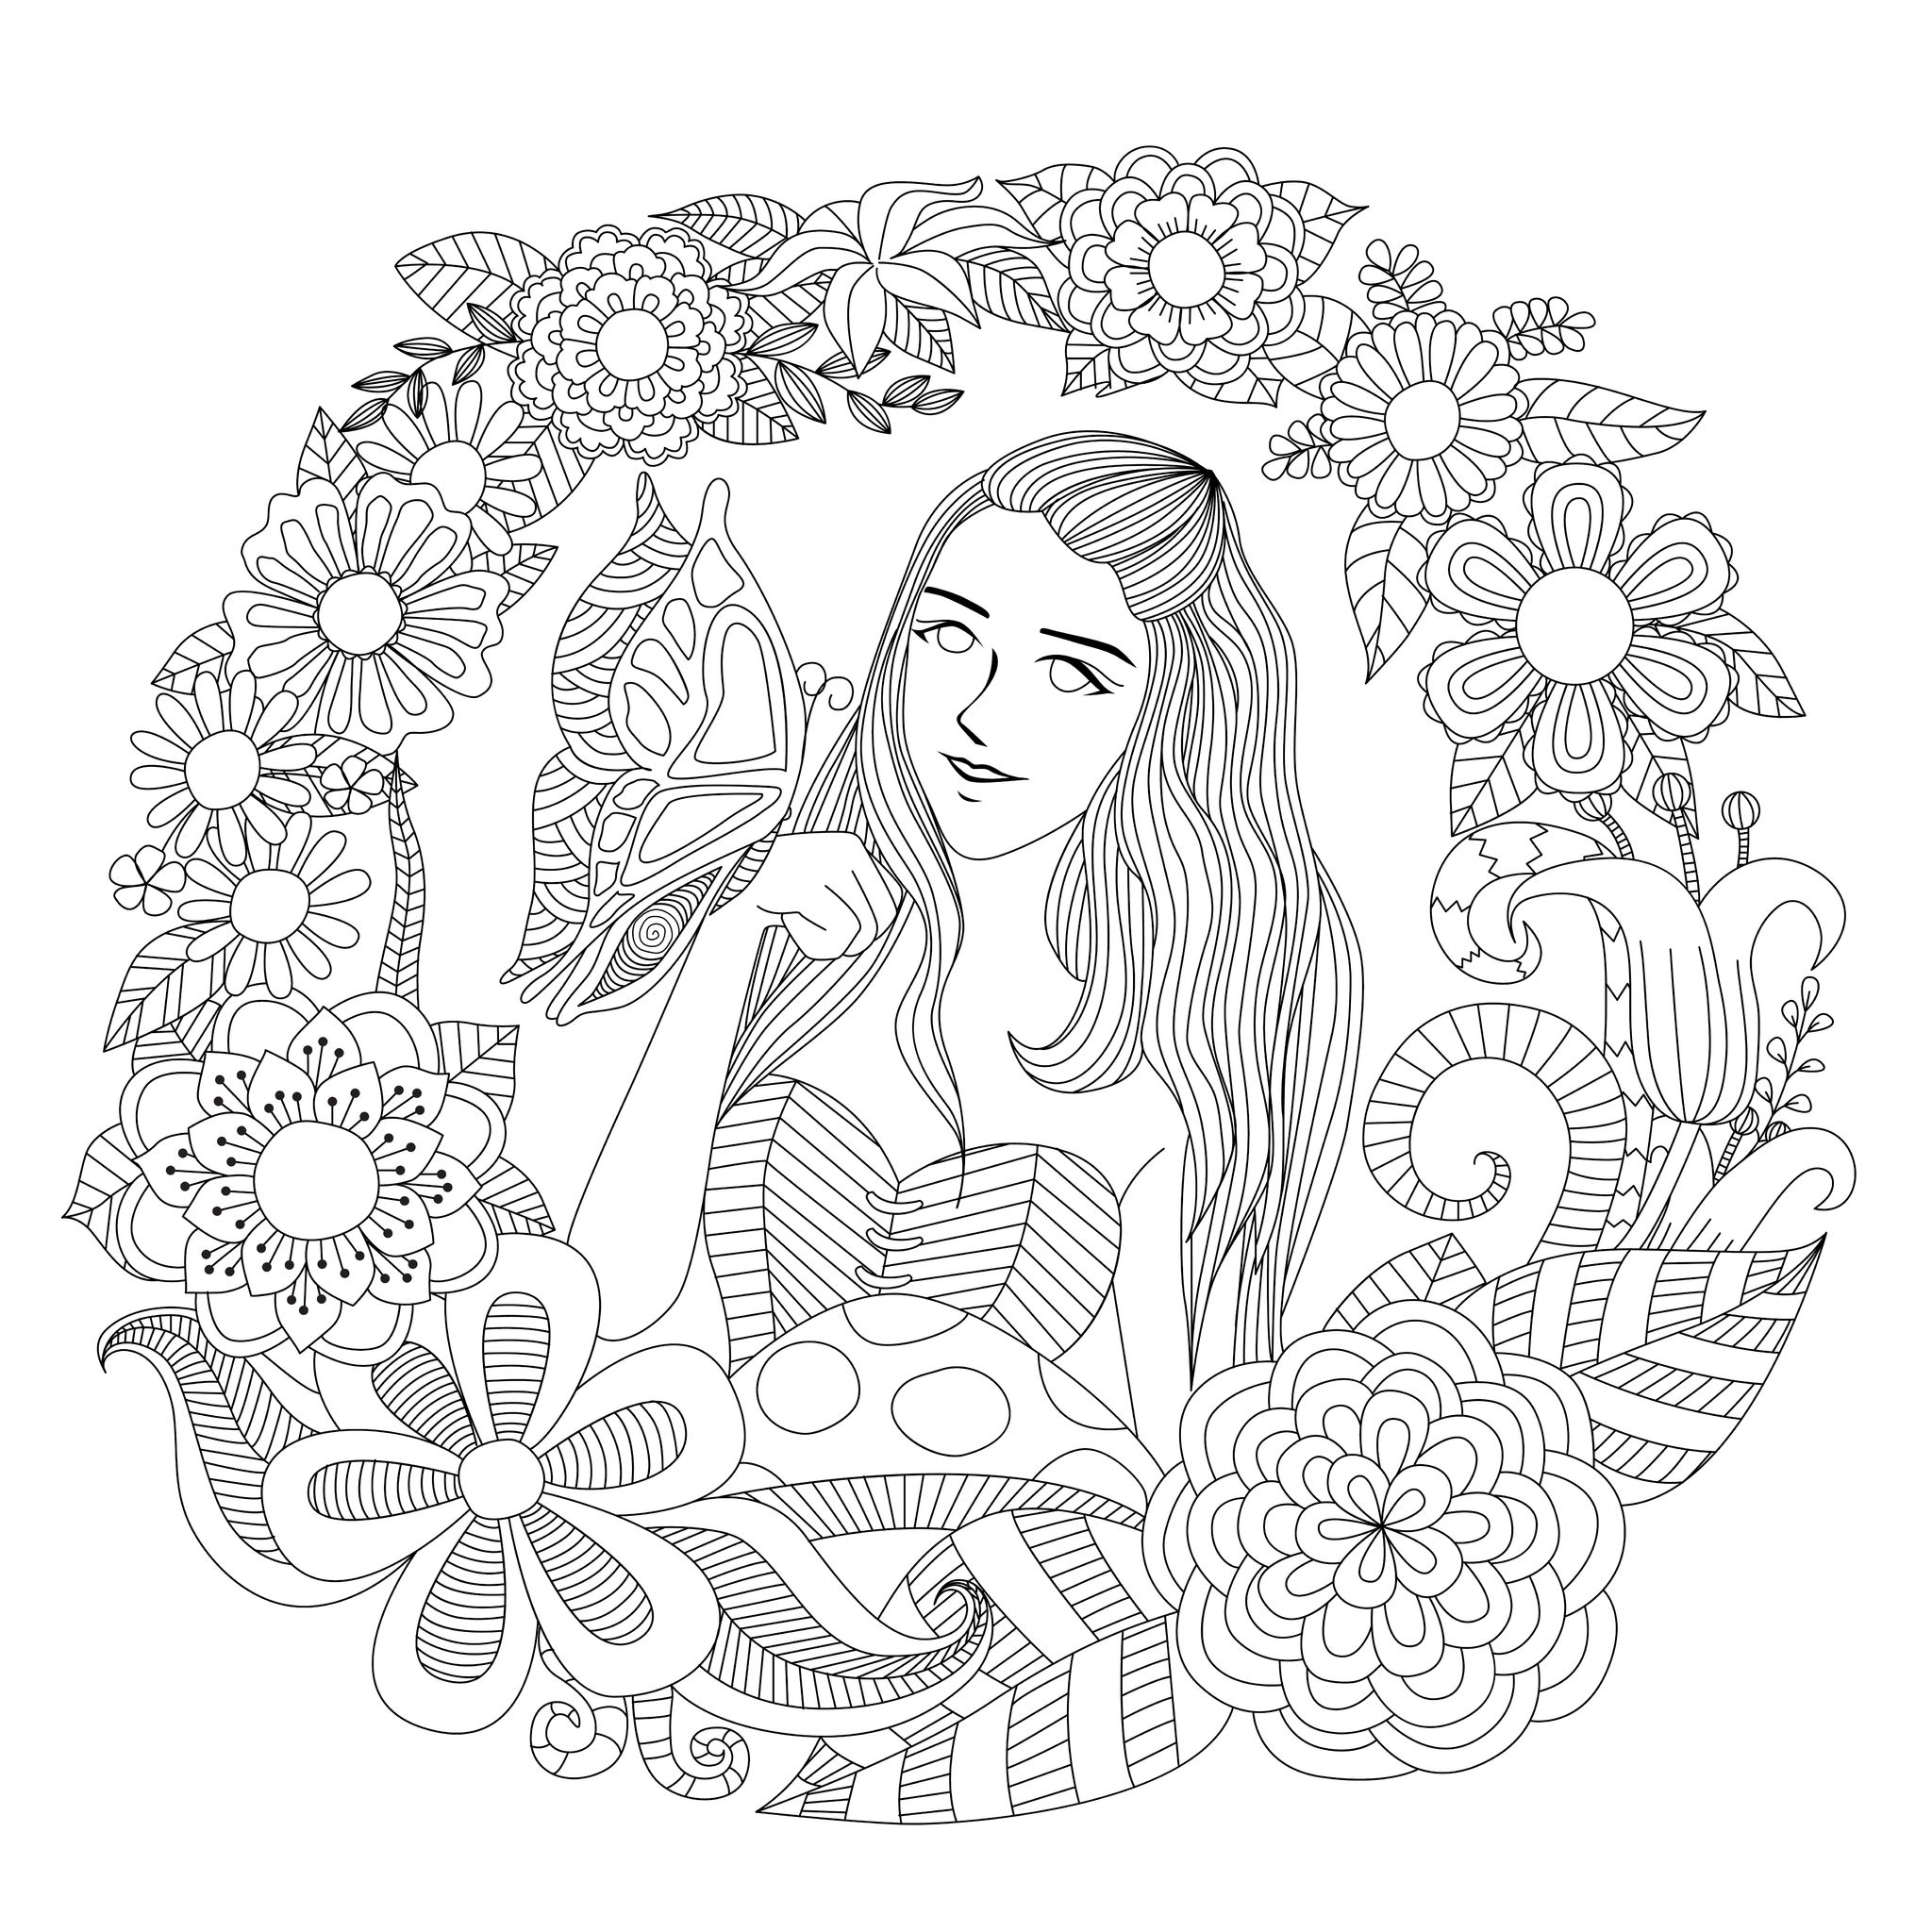 Butterfly Girl Bimdeedee Zen Anti Stress Coloring Pages Fantastic Flowered